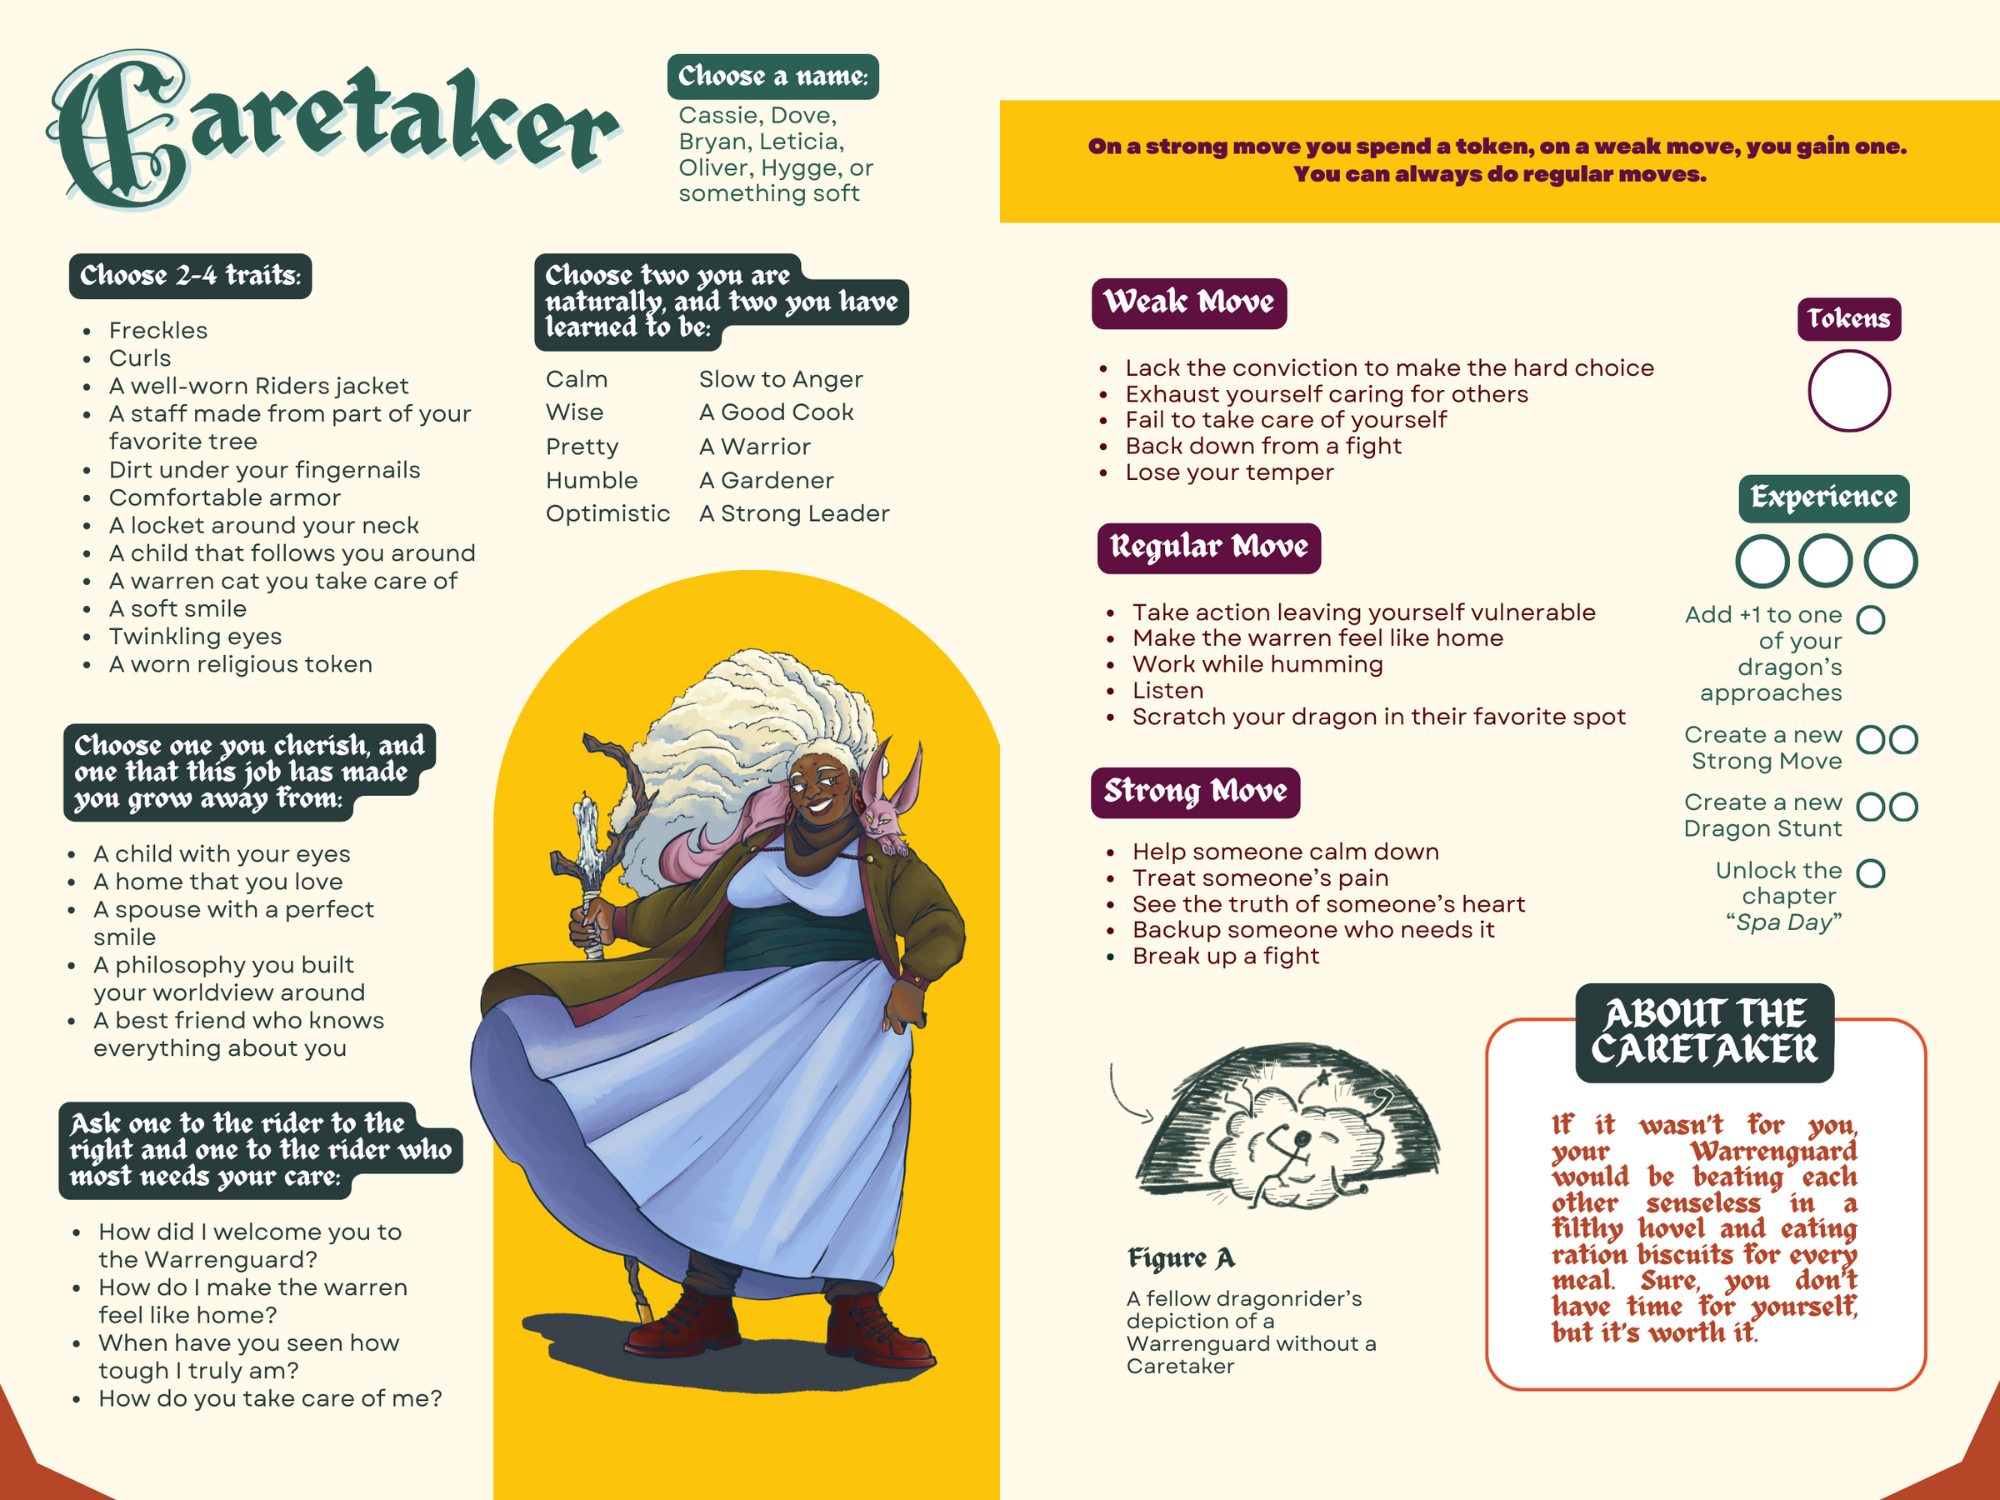 Caretaker character pages: Two pages displaying details about building a caretaker character, such as their name, traits, and movesets.